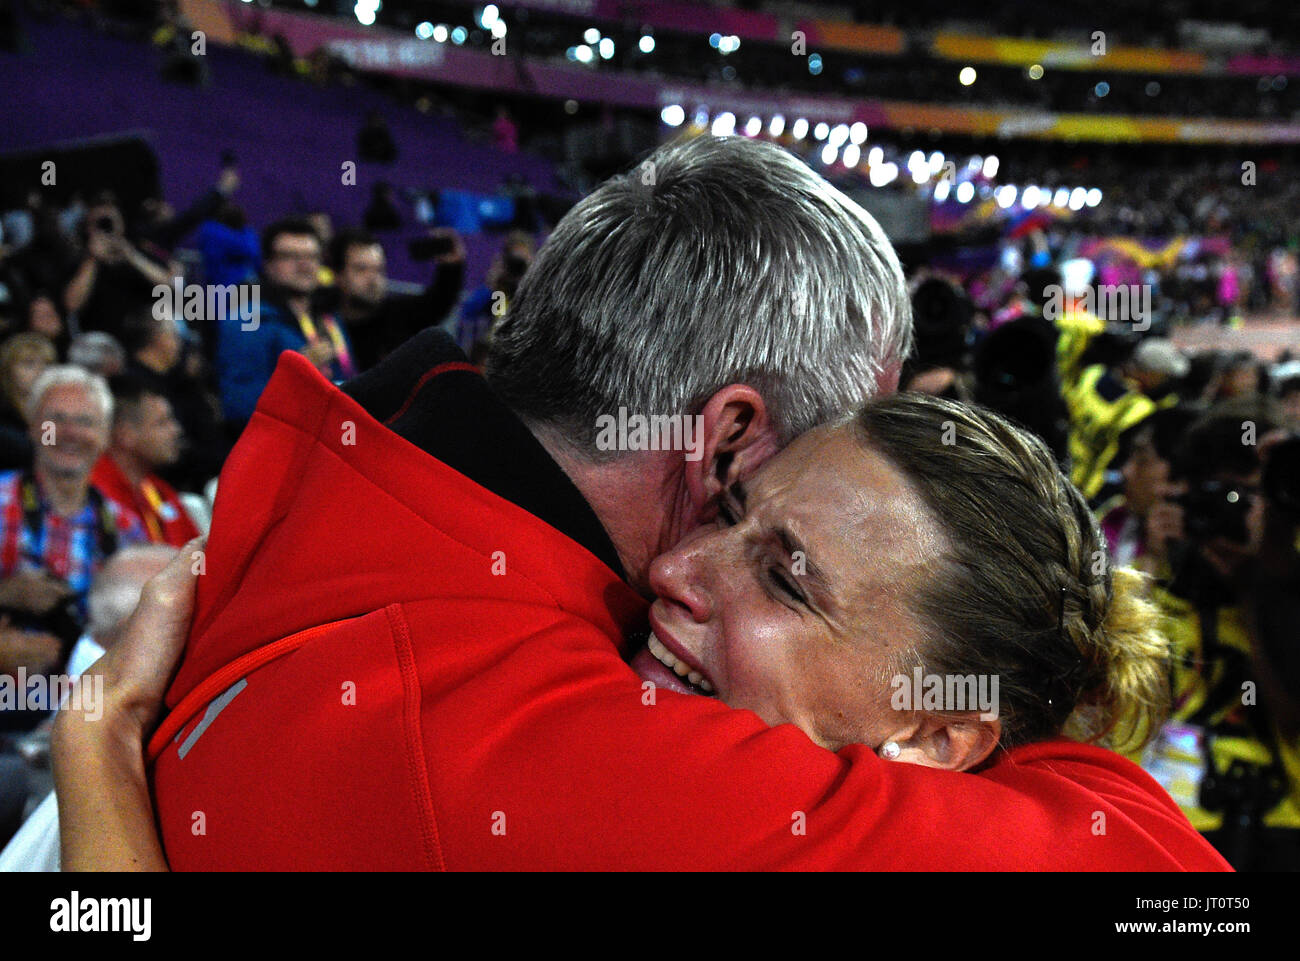 London, UK. 6th Aug, 2017. Carolin Schaefer of Germany celebrates her silver medal in the overall ranking together with her coach Juergen Sammert after the women's 800 metre track of the hepathlon at the IAAF World Championships in Athletics at the Olympic Stadium in London, UK, 6 August 2017. Photo: Rainer Jensen/dpa/Alamy Live News Stock Photo